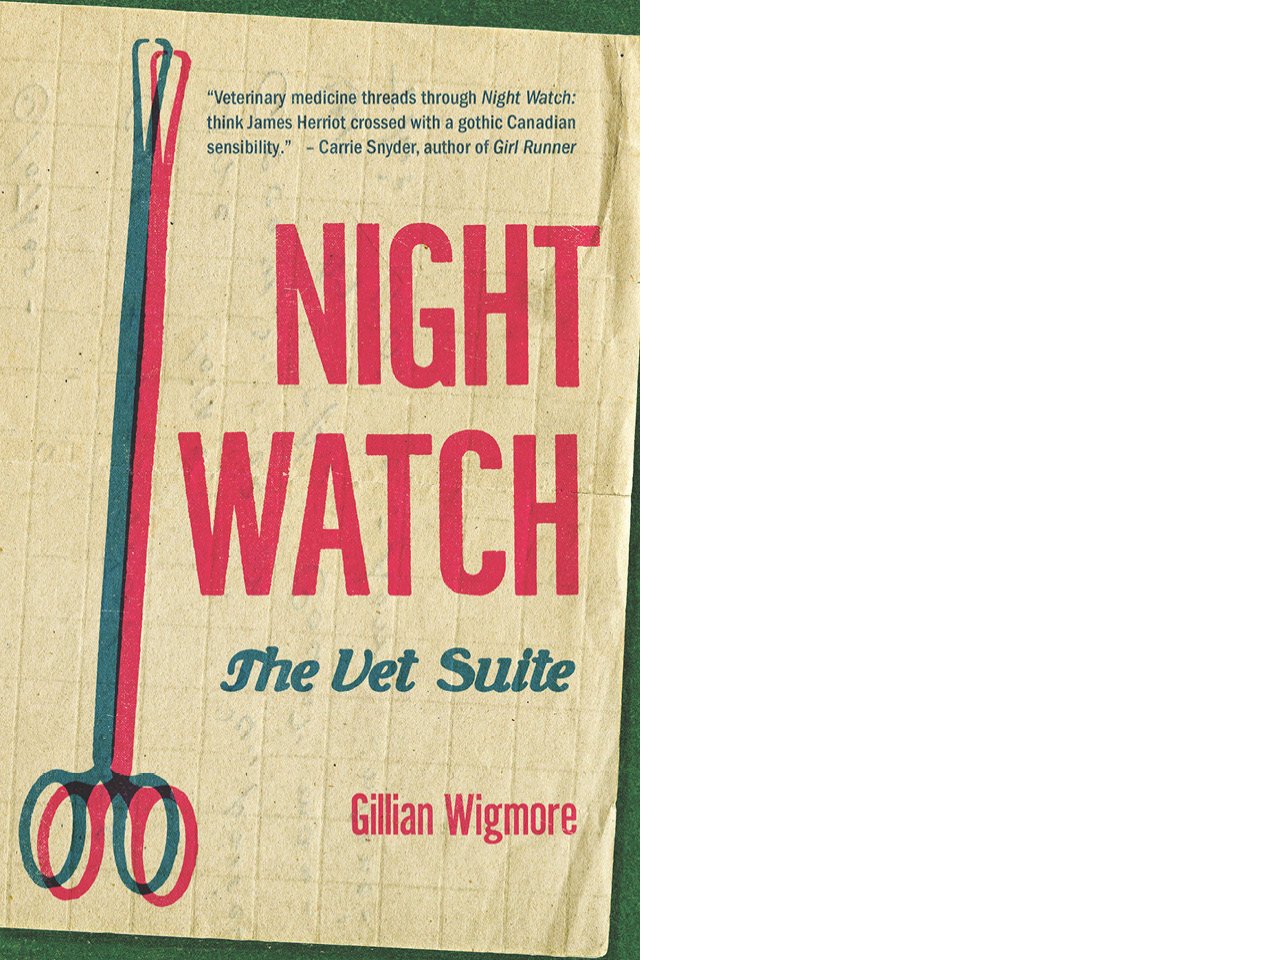 The cover of Night Watch.